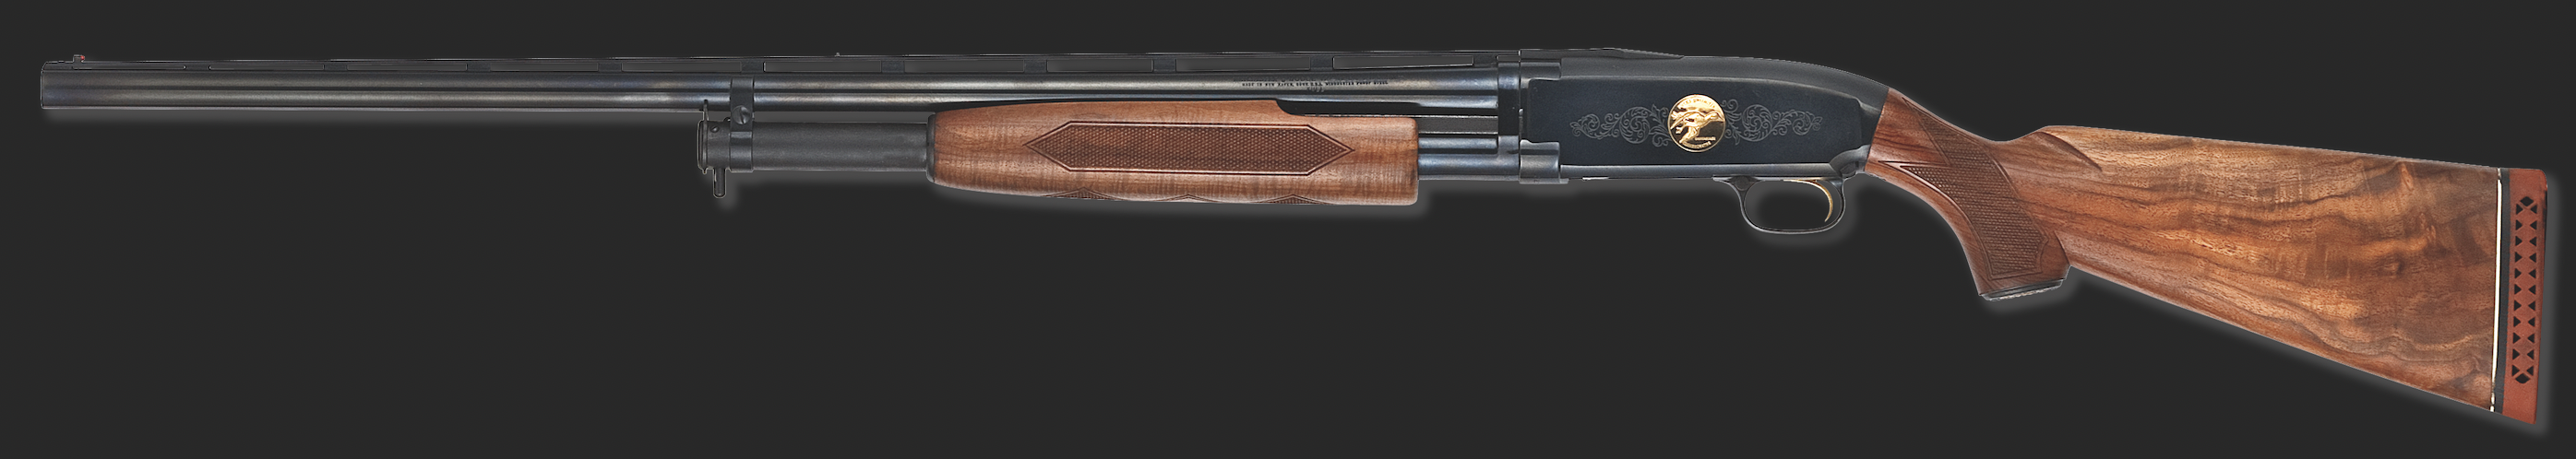 The Model 12 was an iconic duck gun.